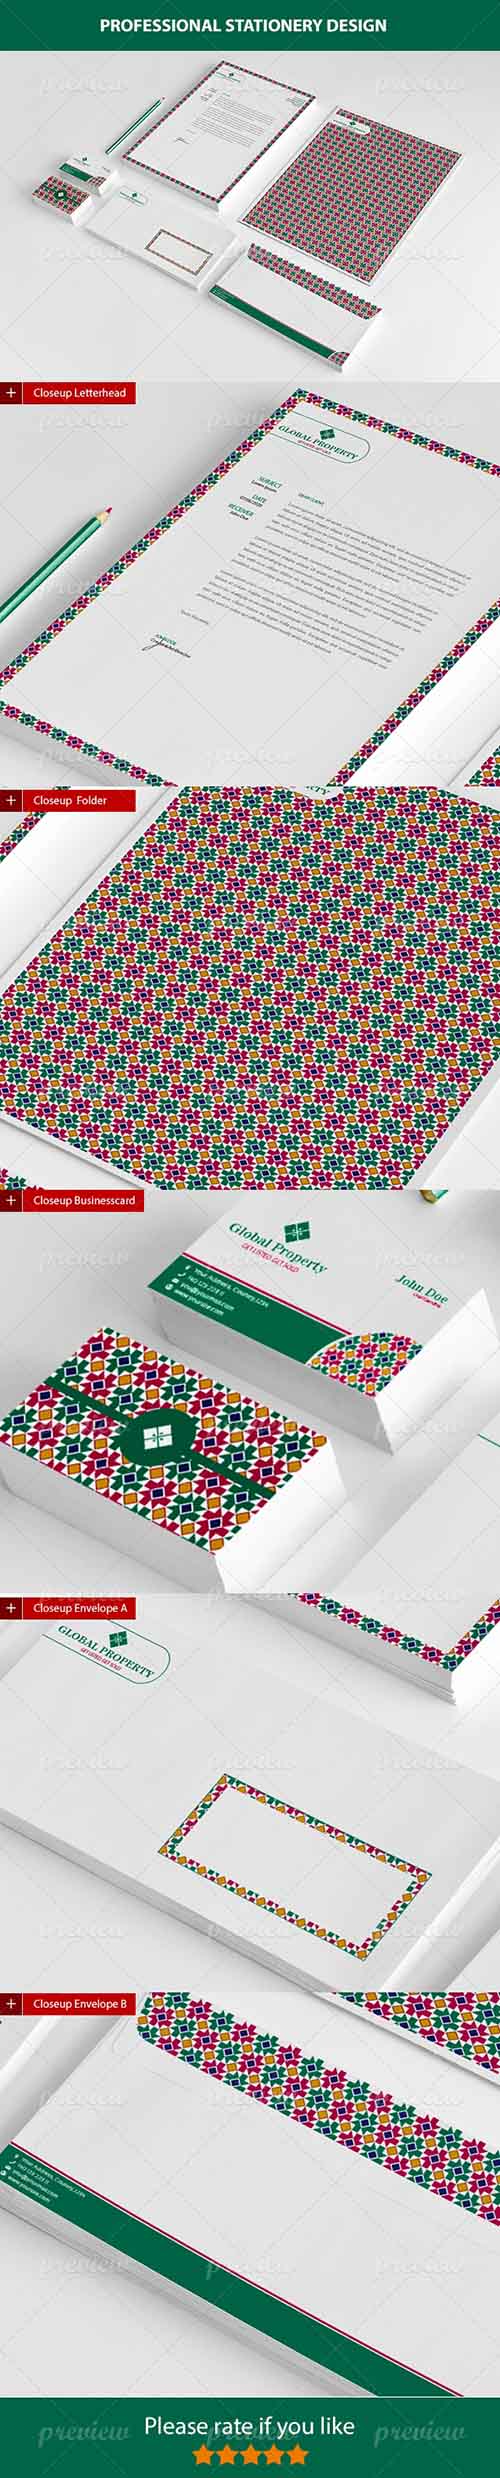 Global Property Stationery Template